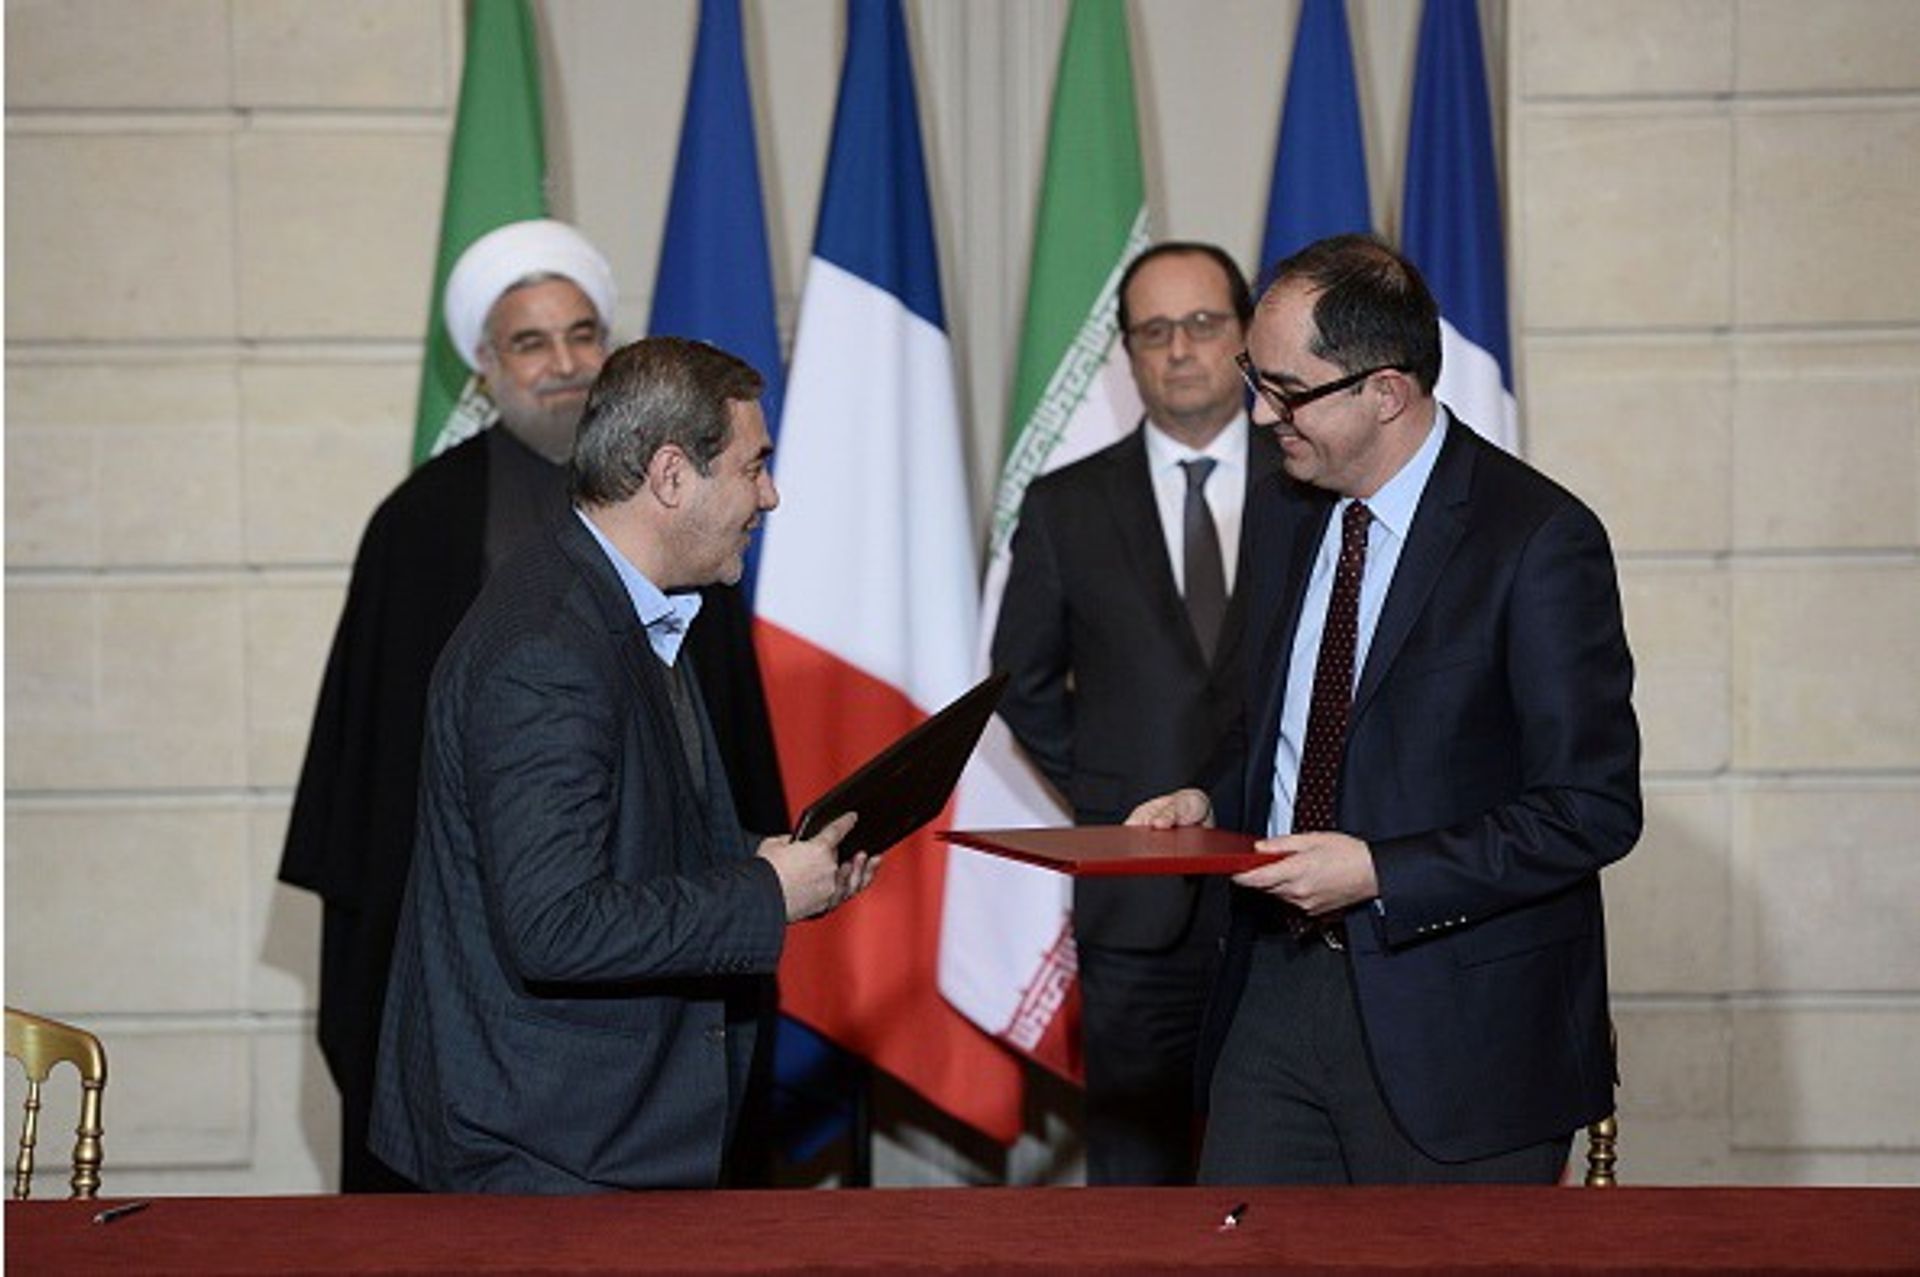 Namvar Motlagh, left, the Vice President of Iran's cultural heritage and tourism organisation, and the Jean-Luc Martinez, the director of the Louvre, signed a cultural cooperation agreement at the presidential palace, with Iranian President Hassan Rouhani on 28 January 2016 STEPHANE DE SAKUTIN/AFP/Getty Images